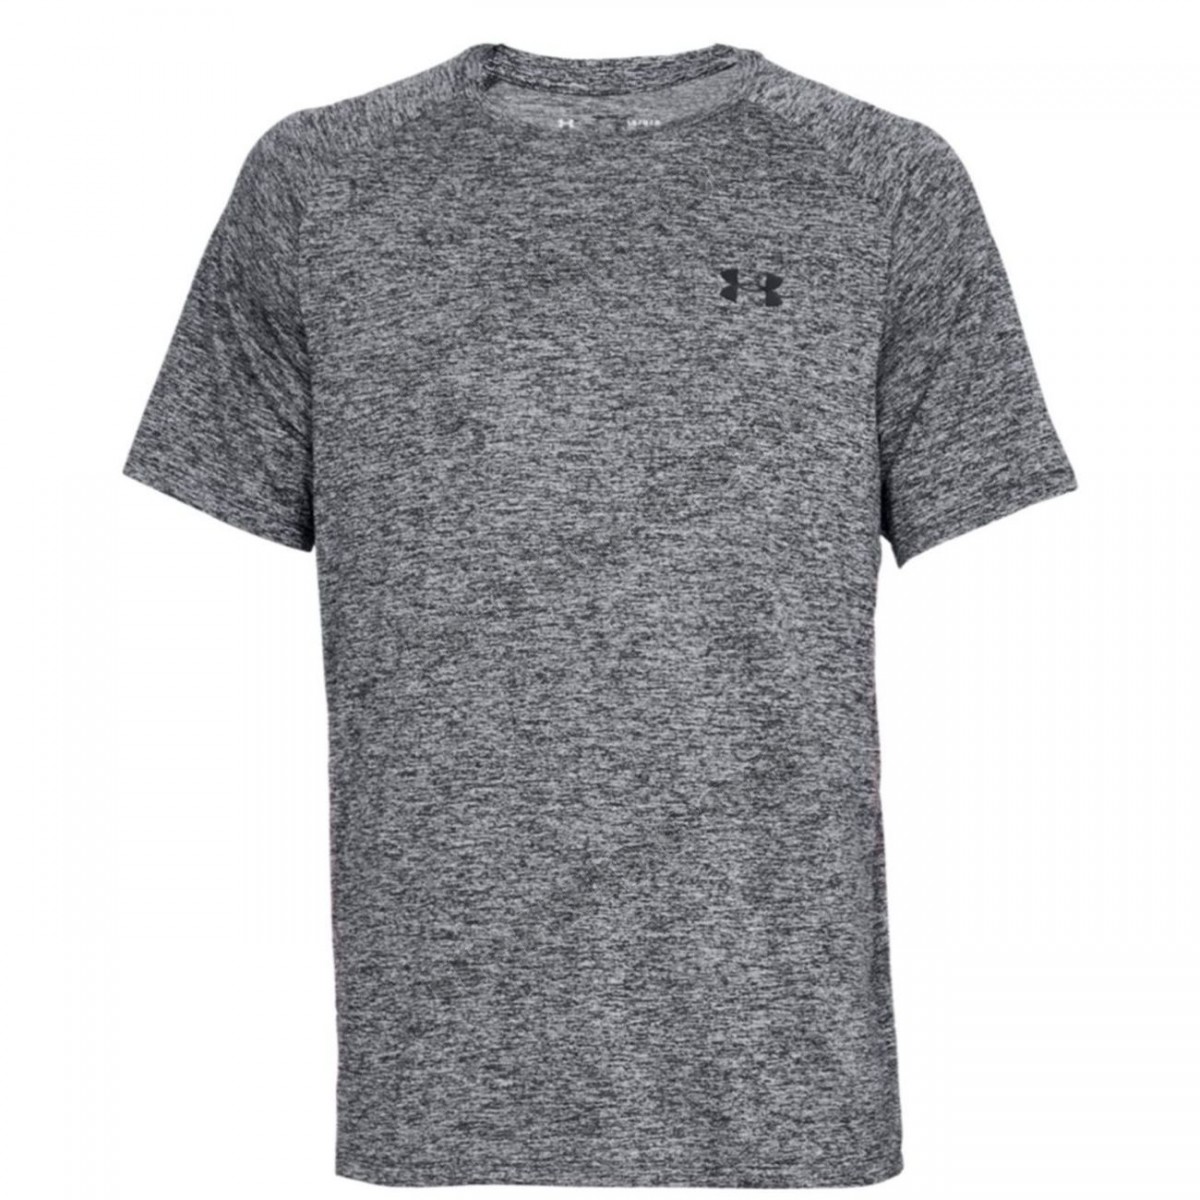 Under Armour/running adulte UNDER ARMOUR Maillot running manches courtes - Homme - UA005 - gris √ Nouveau style √ Soldes - -1